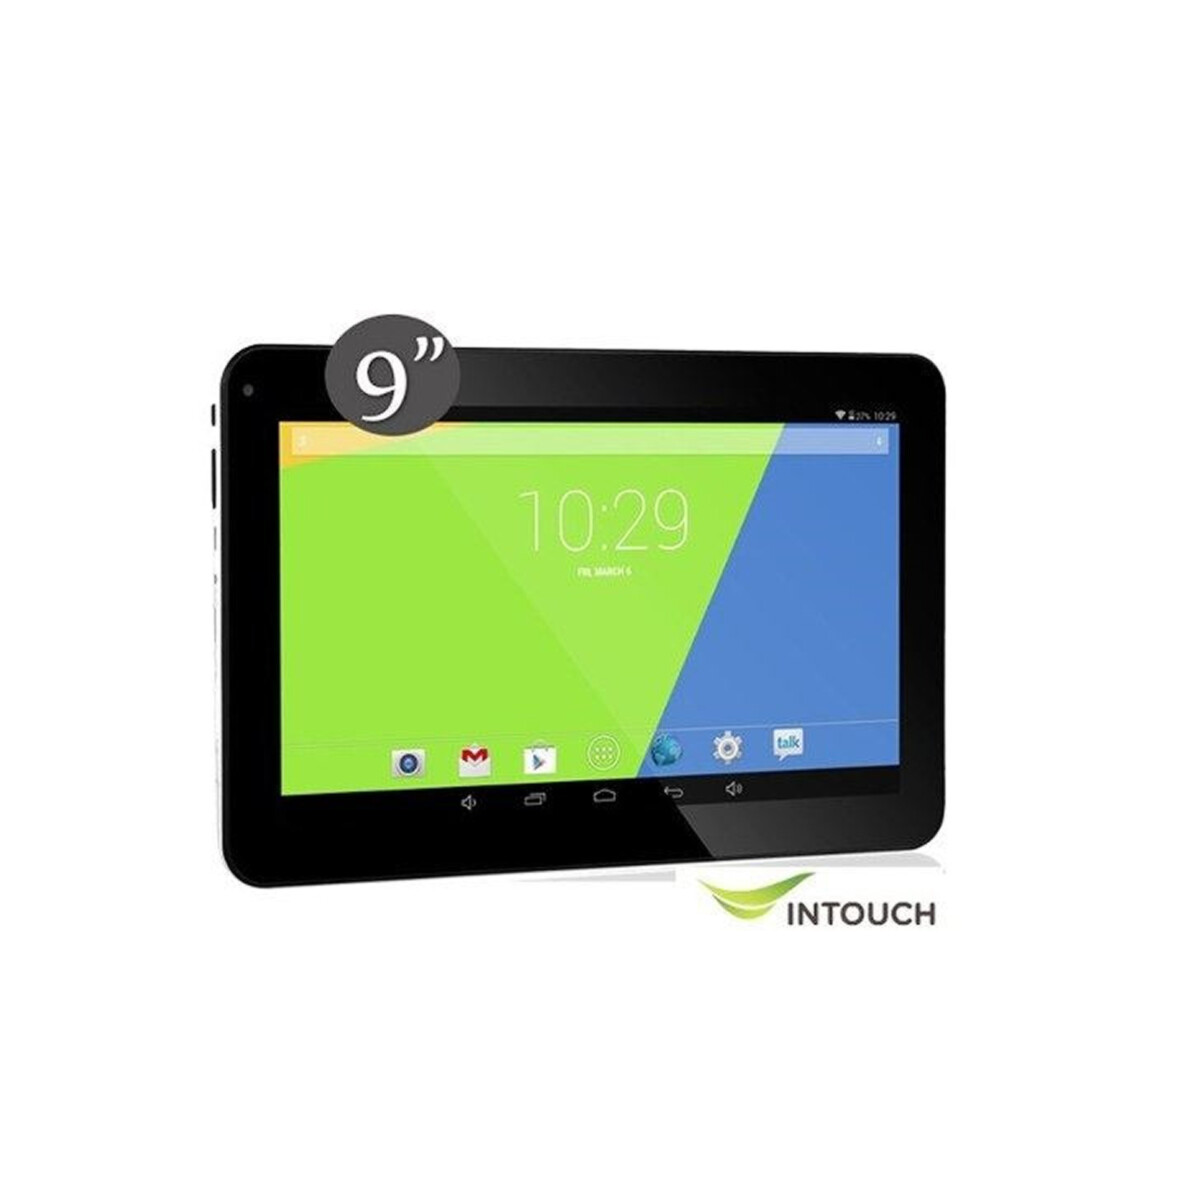 Tablet Intouch 9" Q9000 